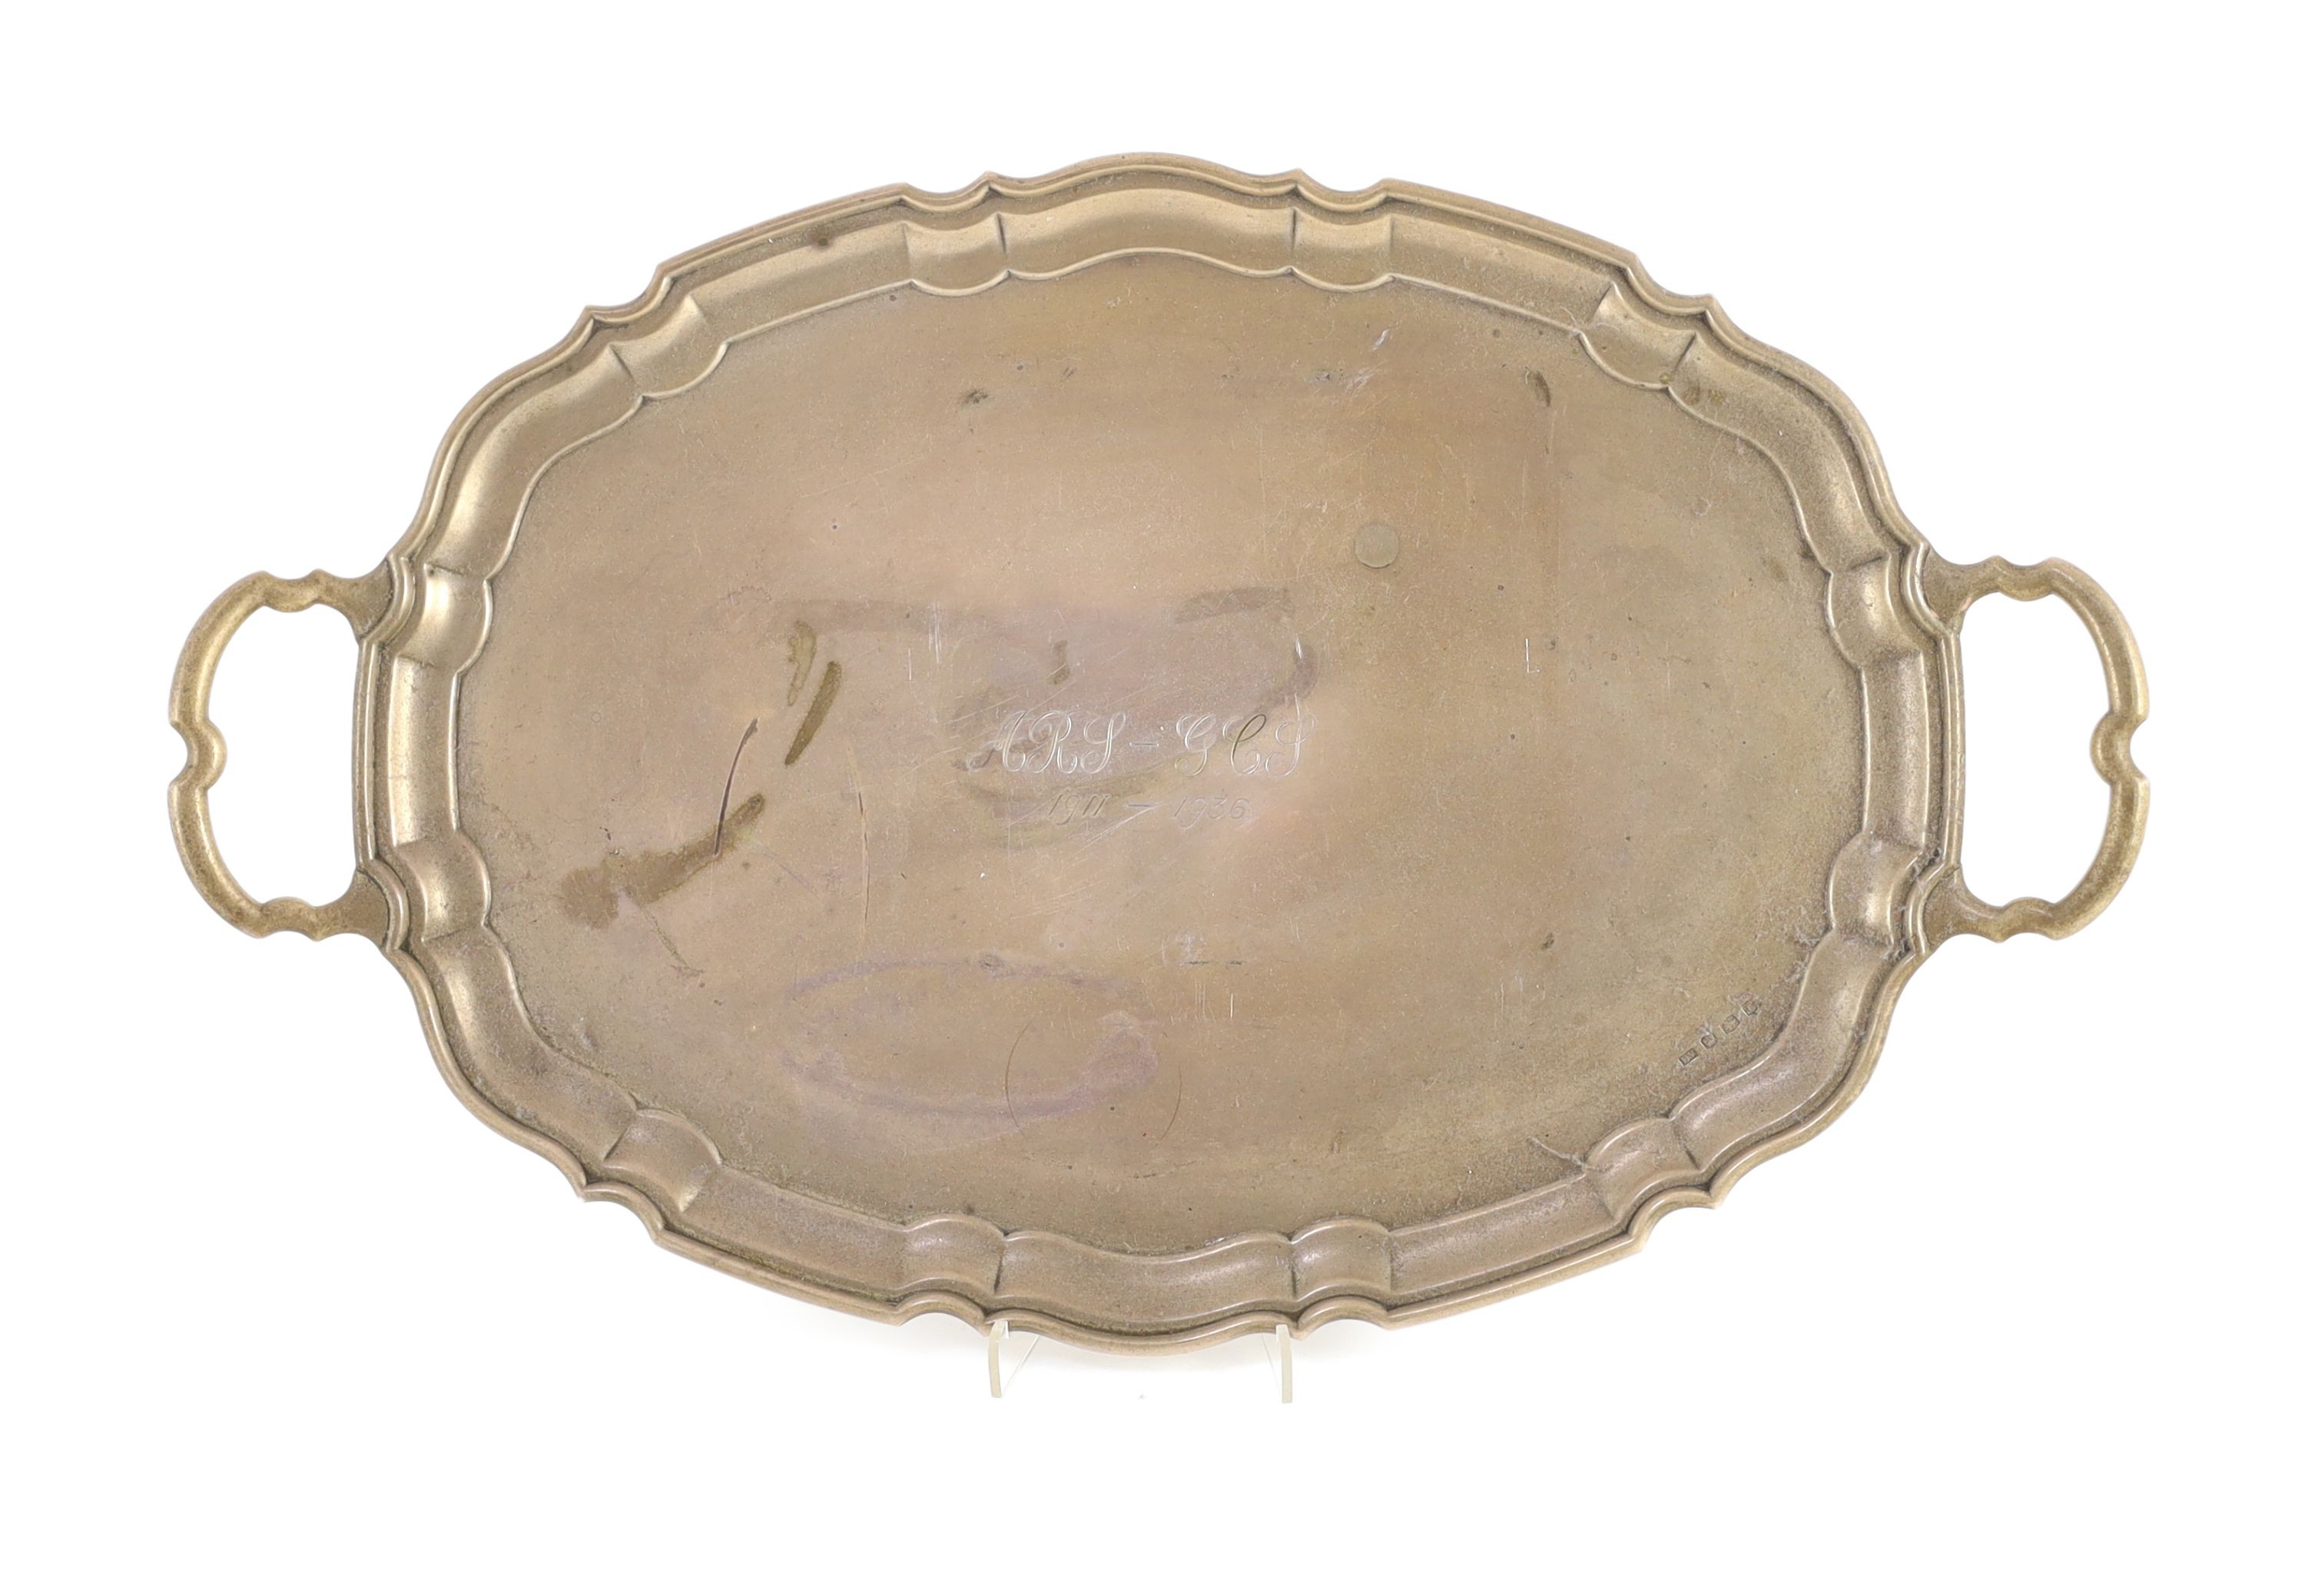 A 1930's silver two handled oval tea tray, by Viner's Ltd